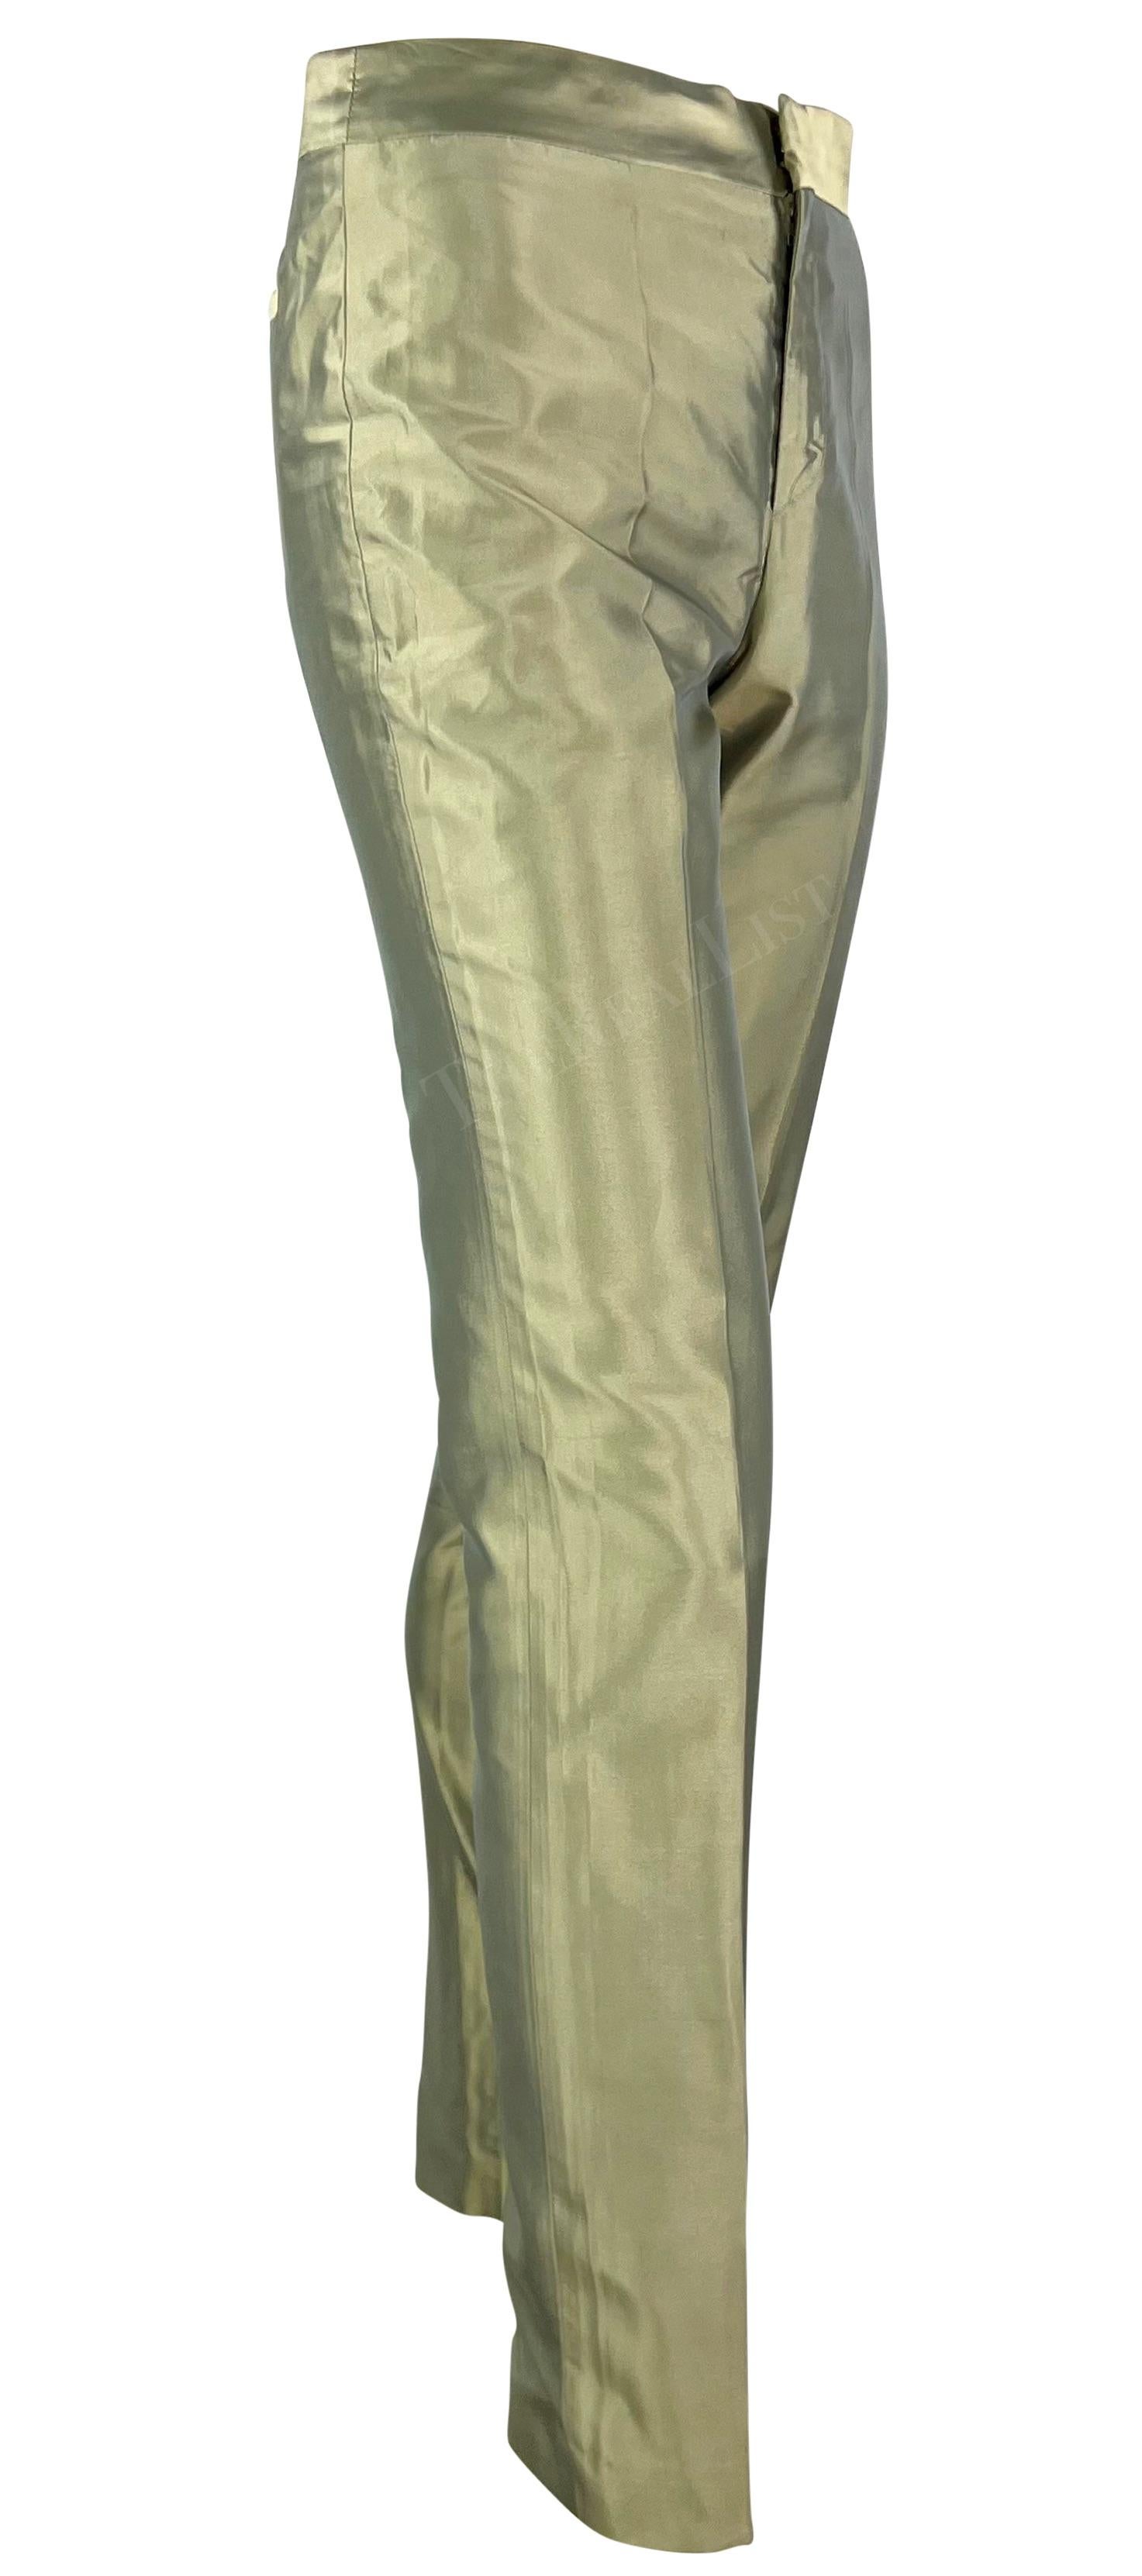 S/S 2000 Gucci by Tom Ford Light Green Iridescent Silk Straight Leg Pants For Sale 3